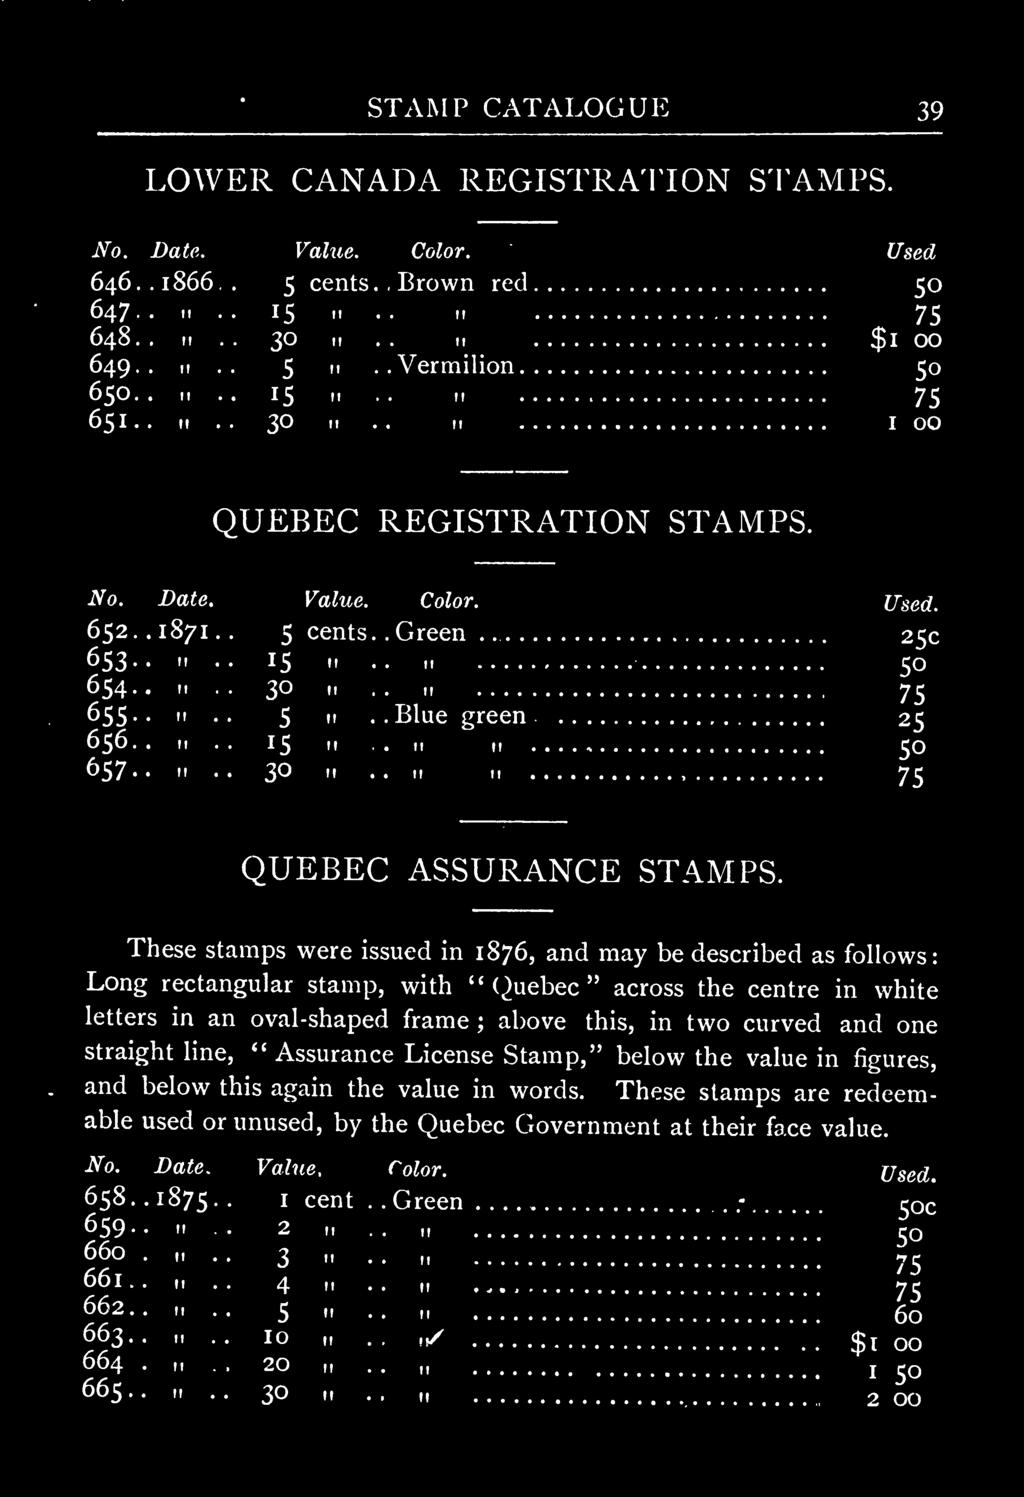 "Quebec" across the centre in white letters in an oval-shaped frame ; above this, in two curved and one straight line, "Assurance License Stamp," below the value in figures, and below this again the